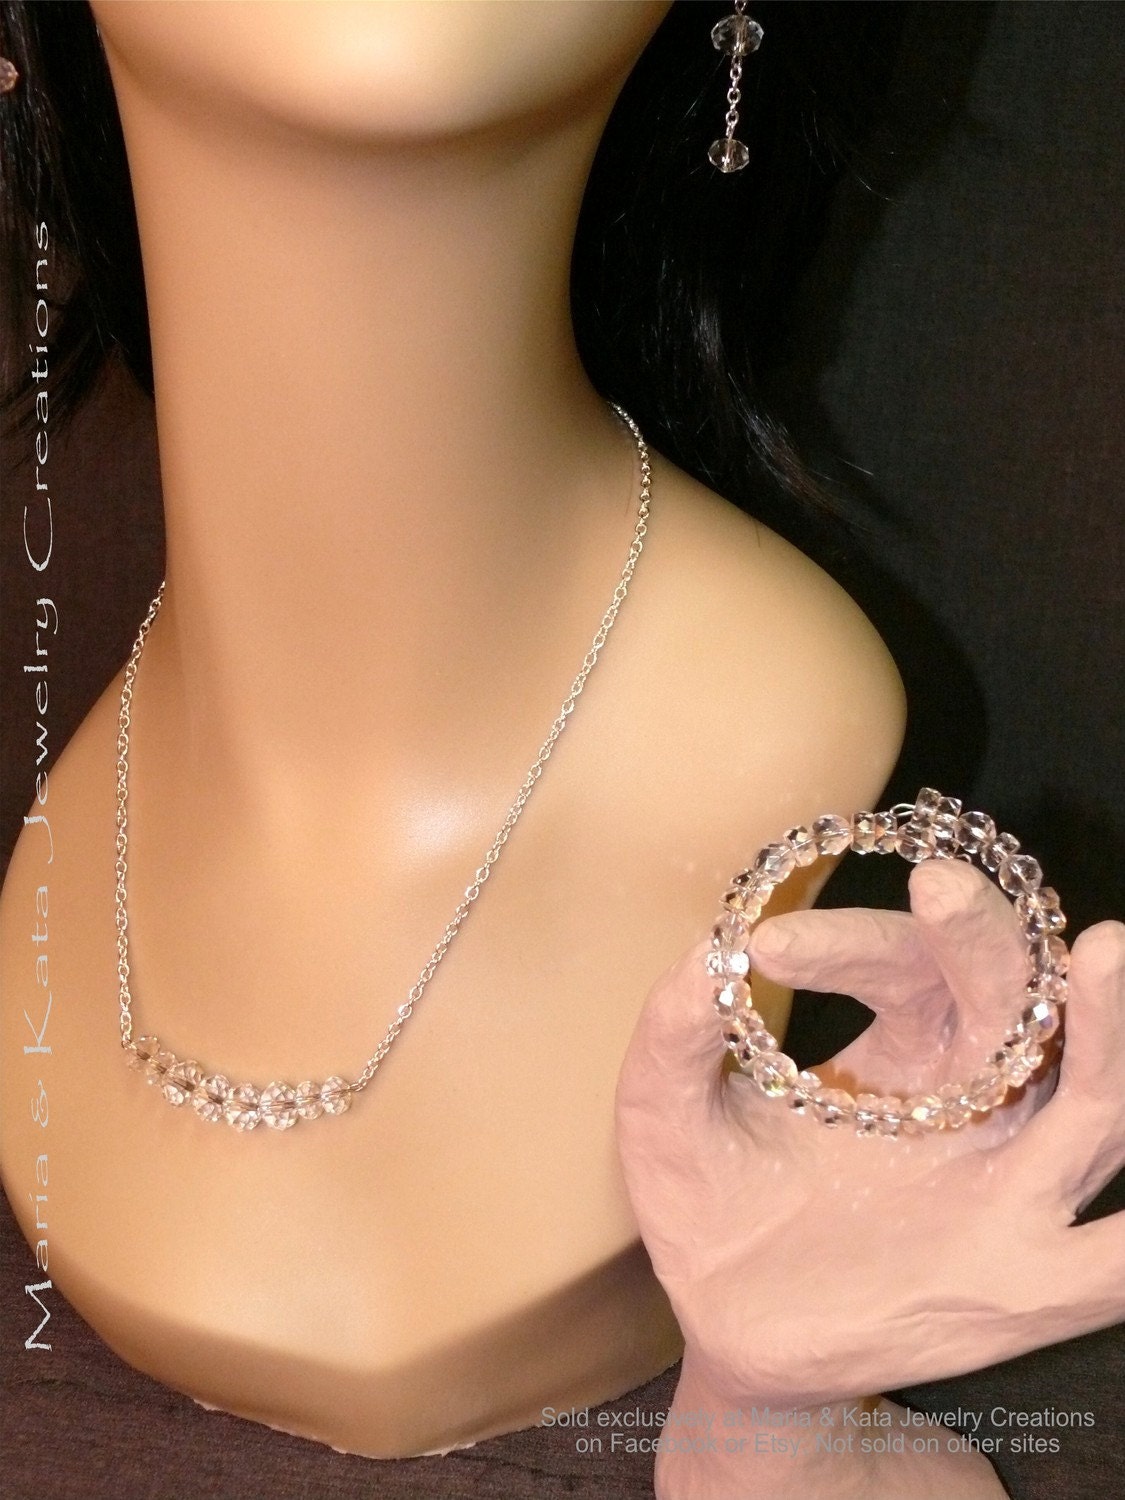 Lola's Glimmering Eyes Collection- Crystal Rondelles Earrings Necklace and Bracelet Set